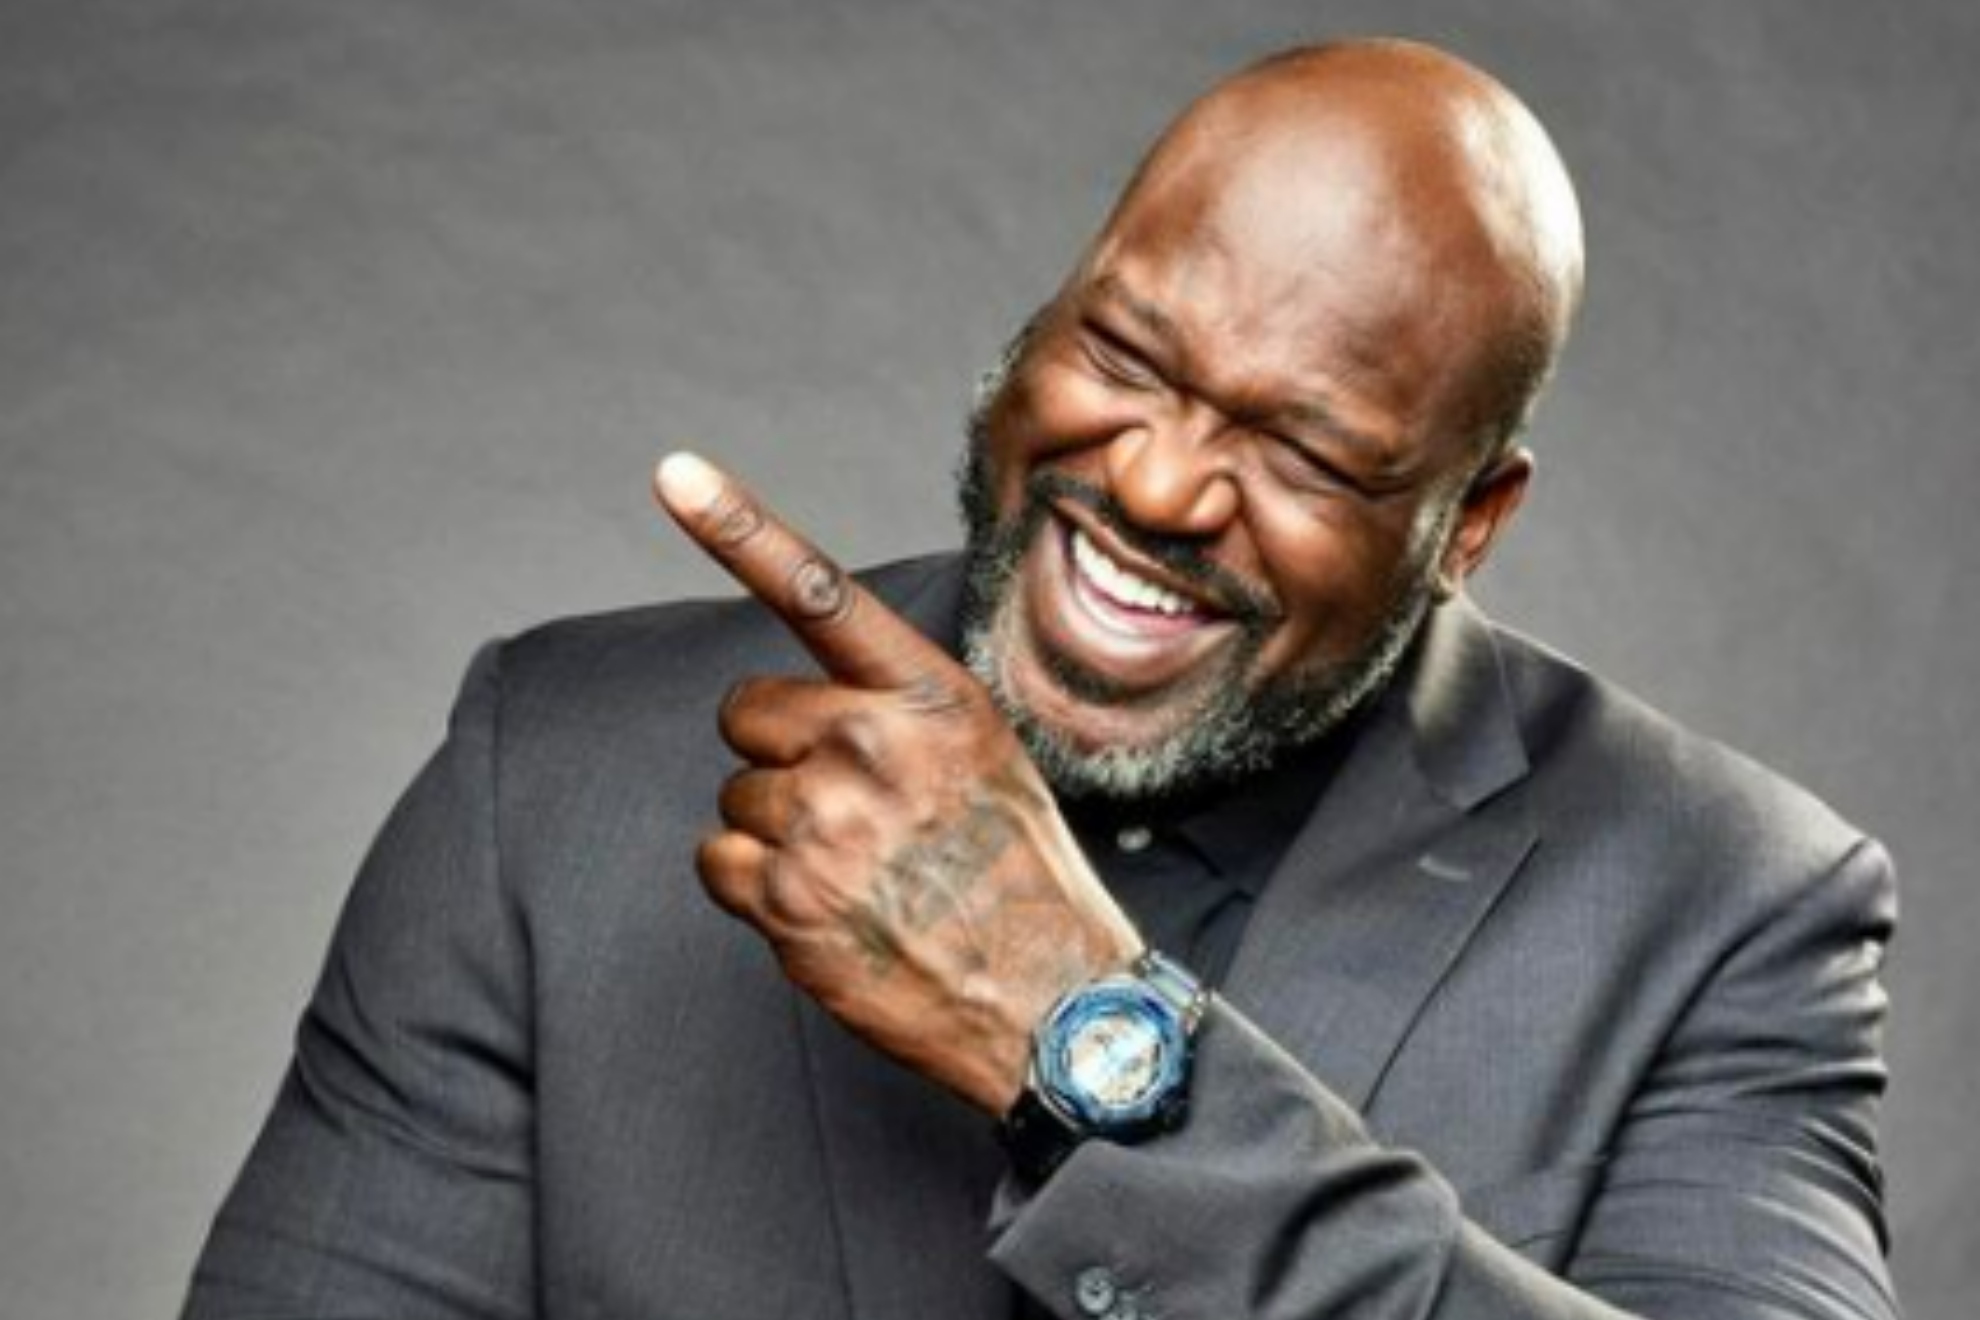 Shaquille O'Neal will have his very own HBO docuseries where his rise to basketball and business fame will be depicted